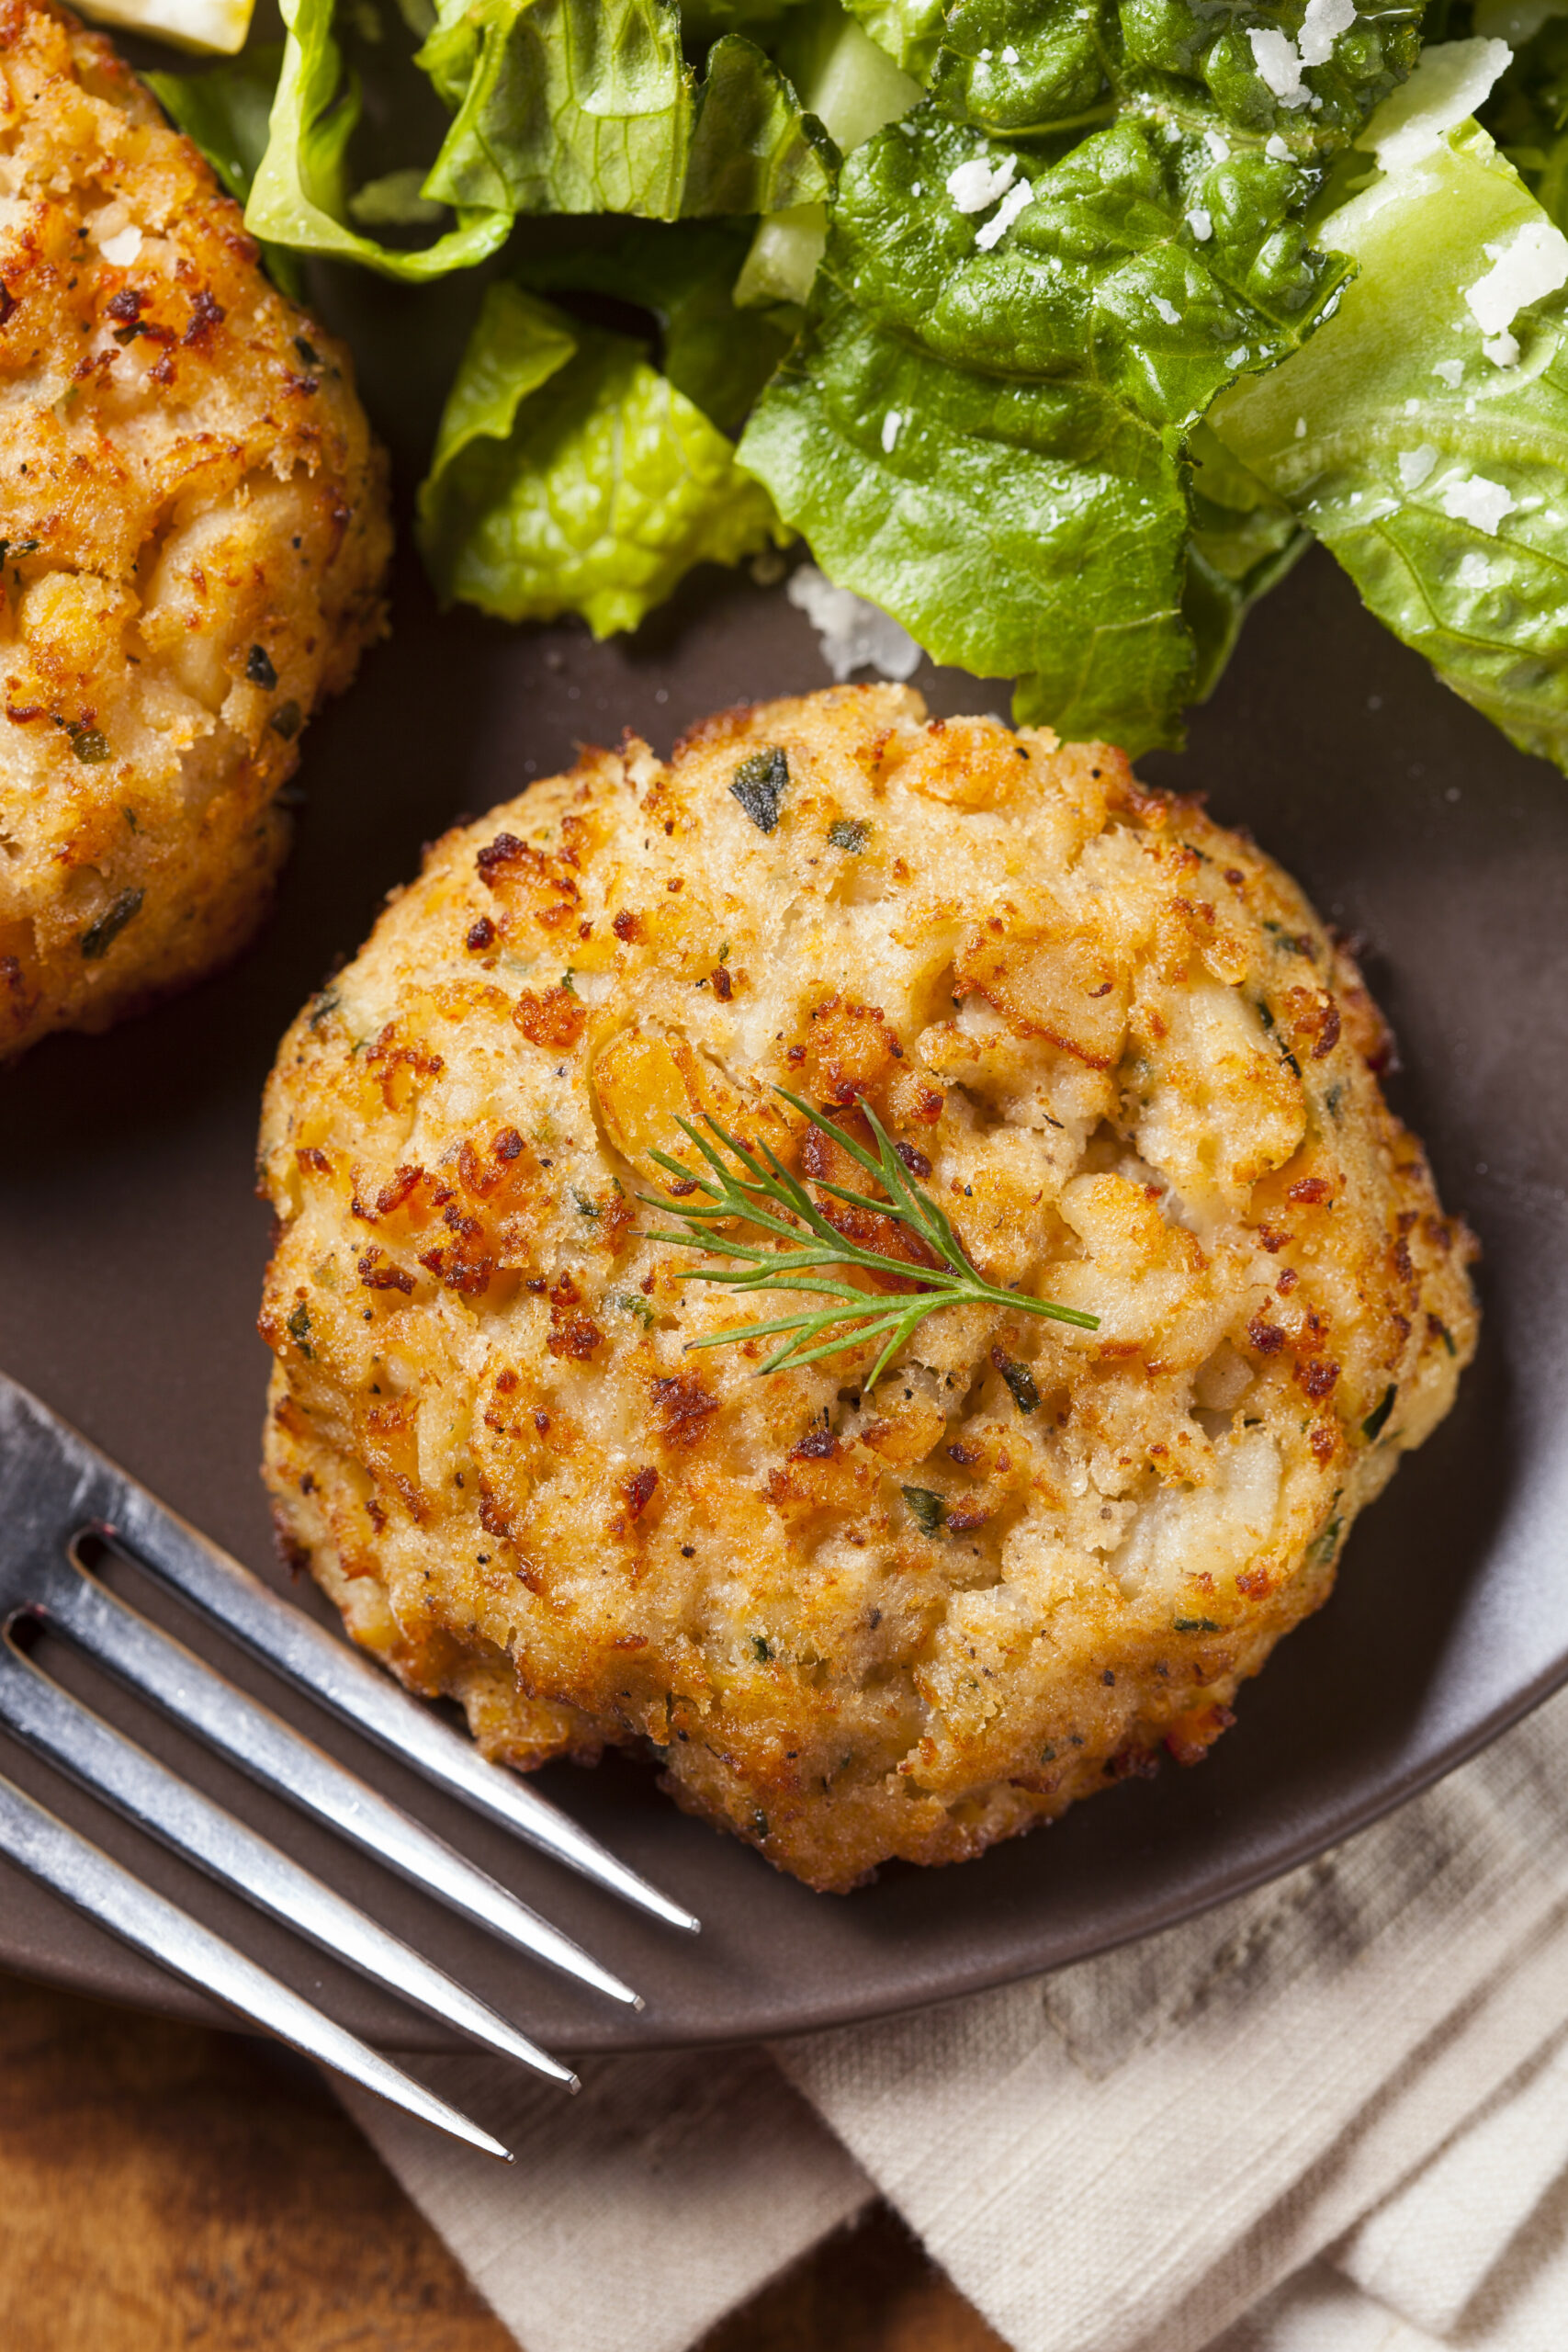 How to Reheat Crab Cakes Without Drying Them Out